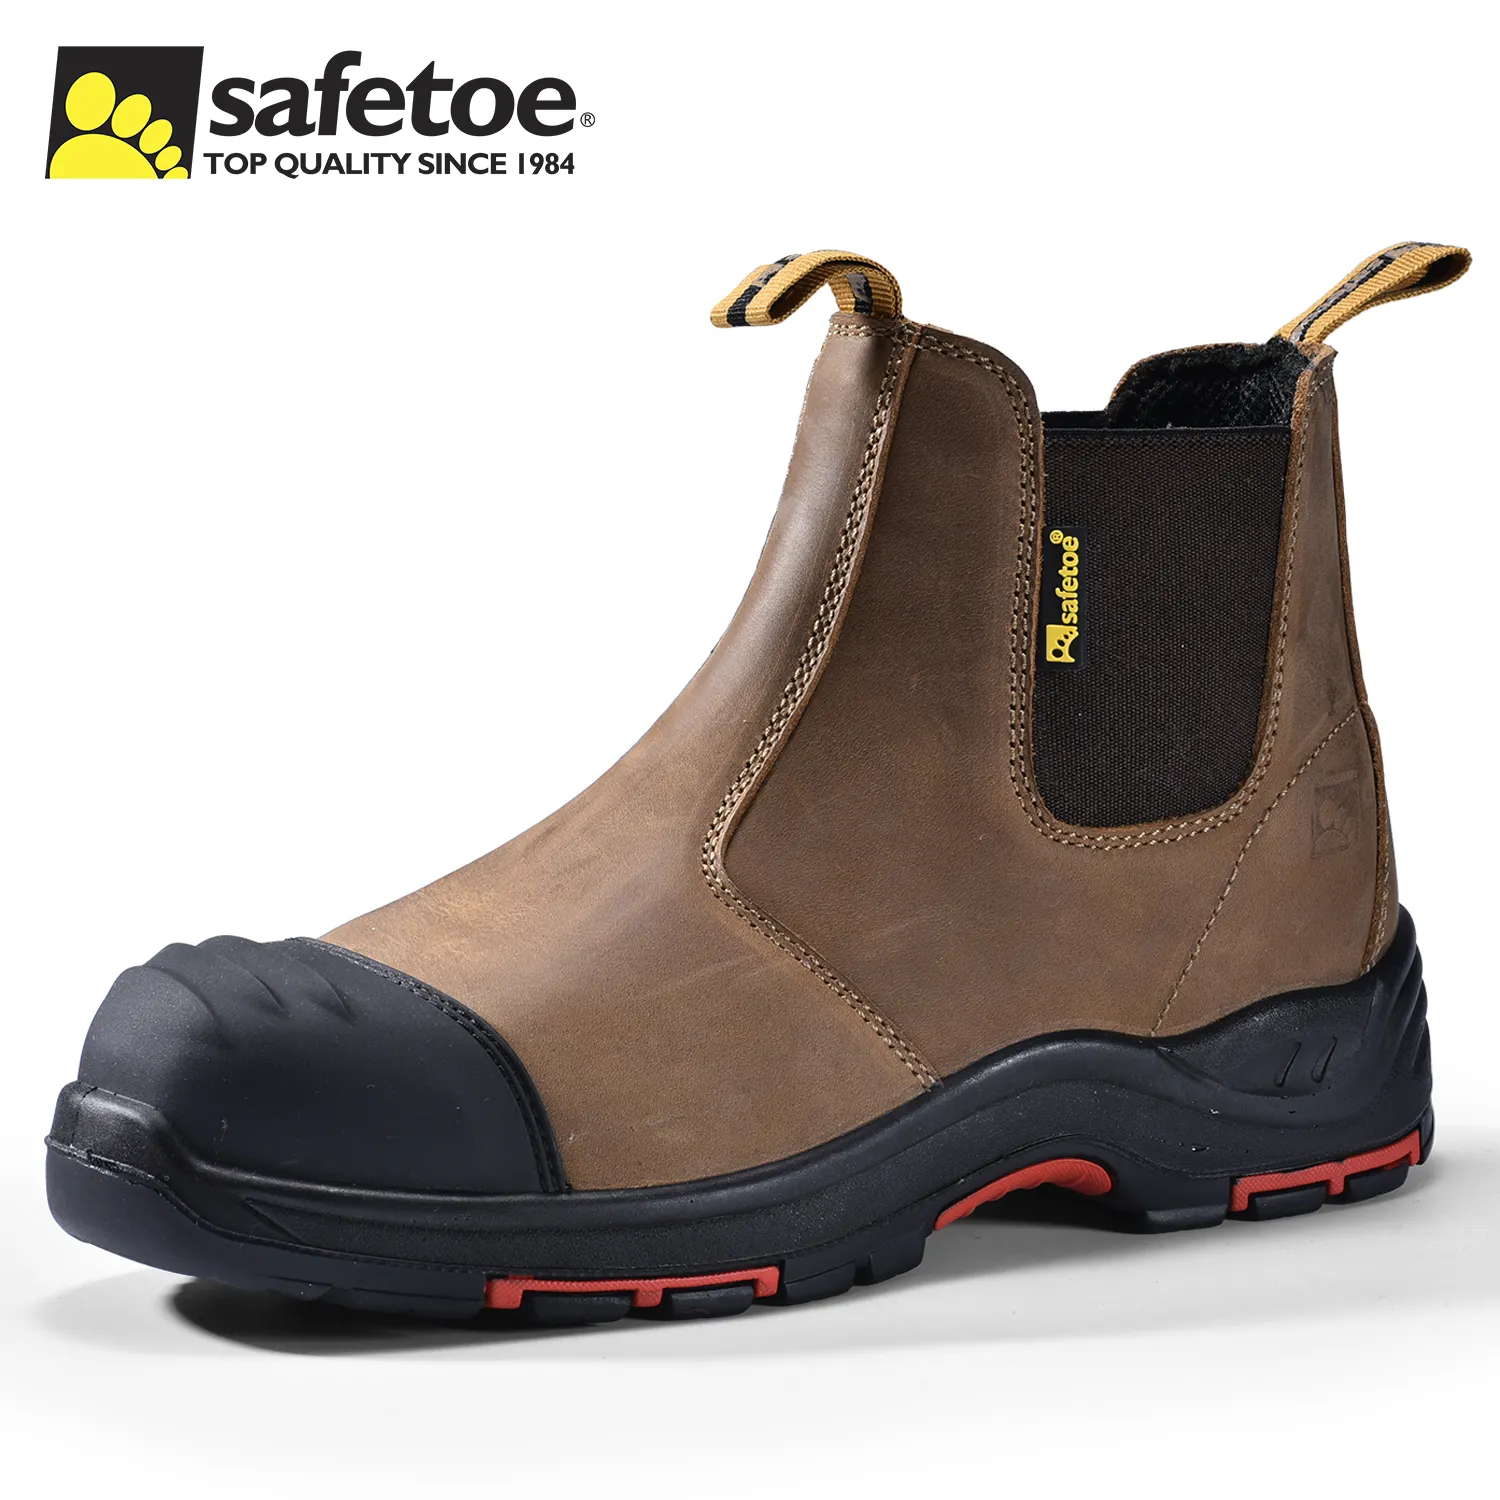 Safetoe S3 Composite Toe Safety Boot Men's Heavy Duty Mining Industrial Construction Work Boot Shoes